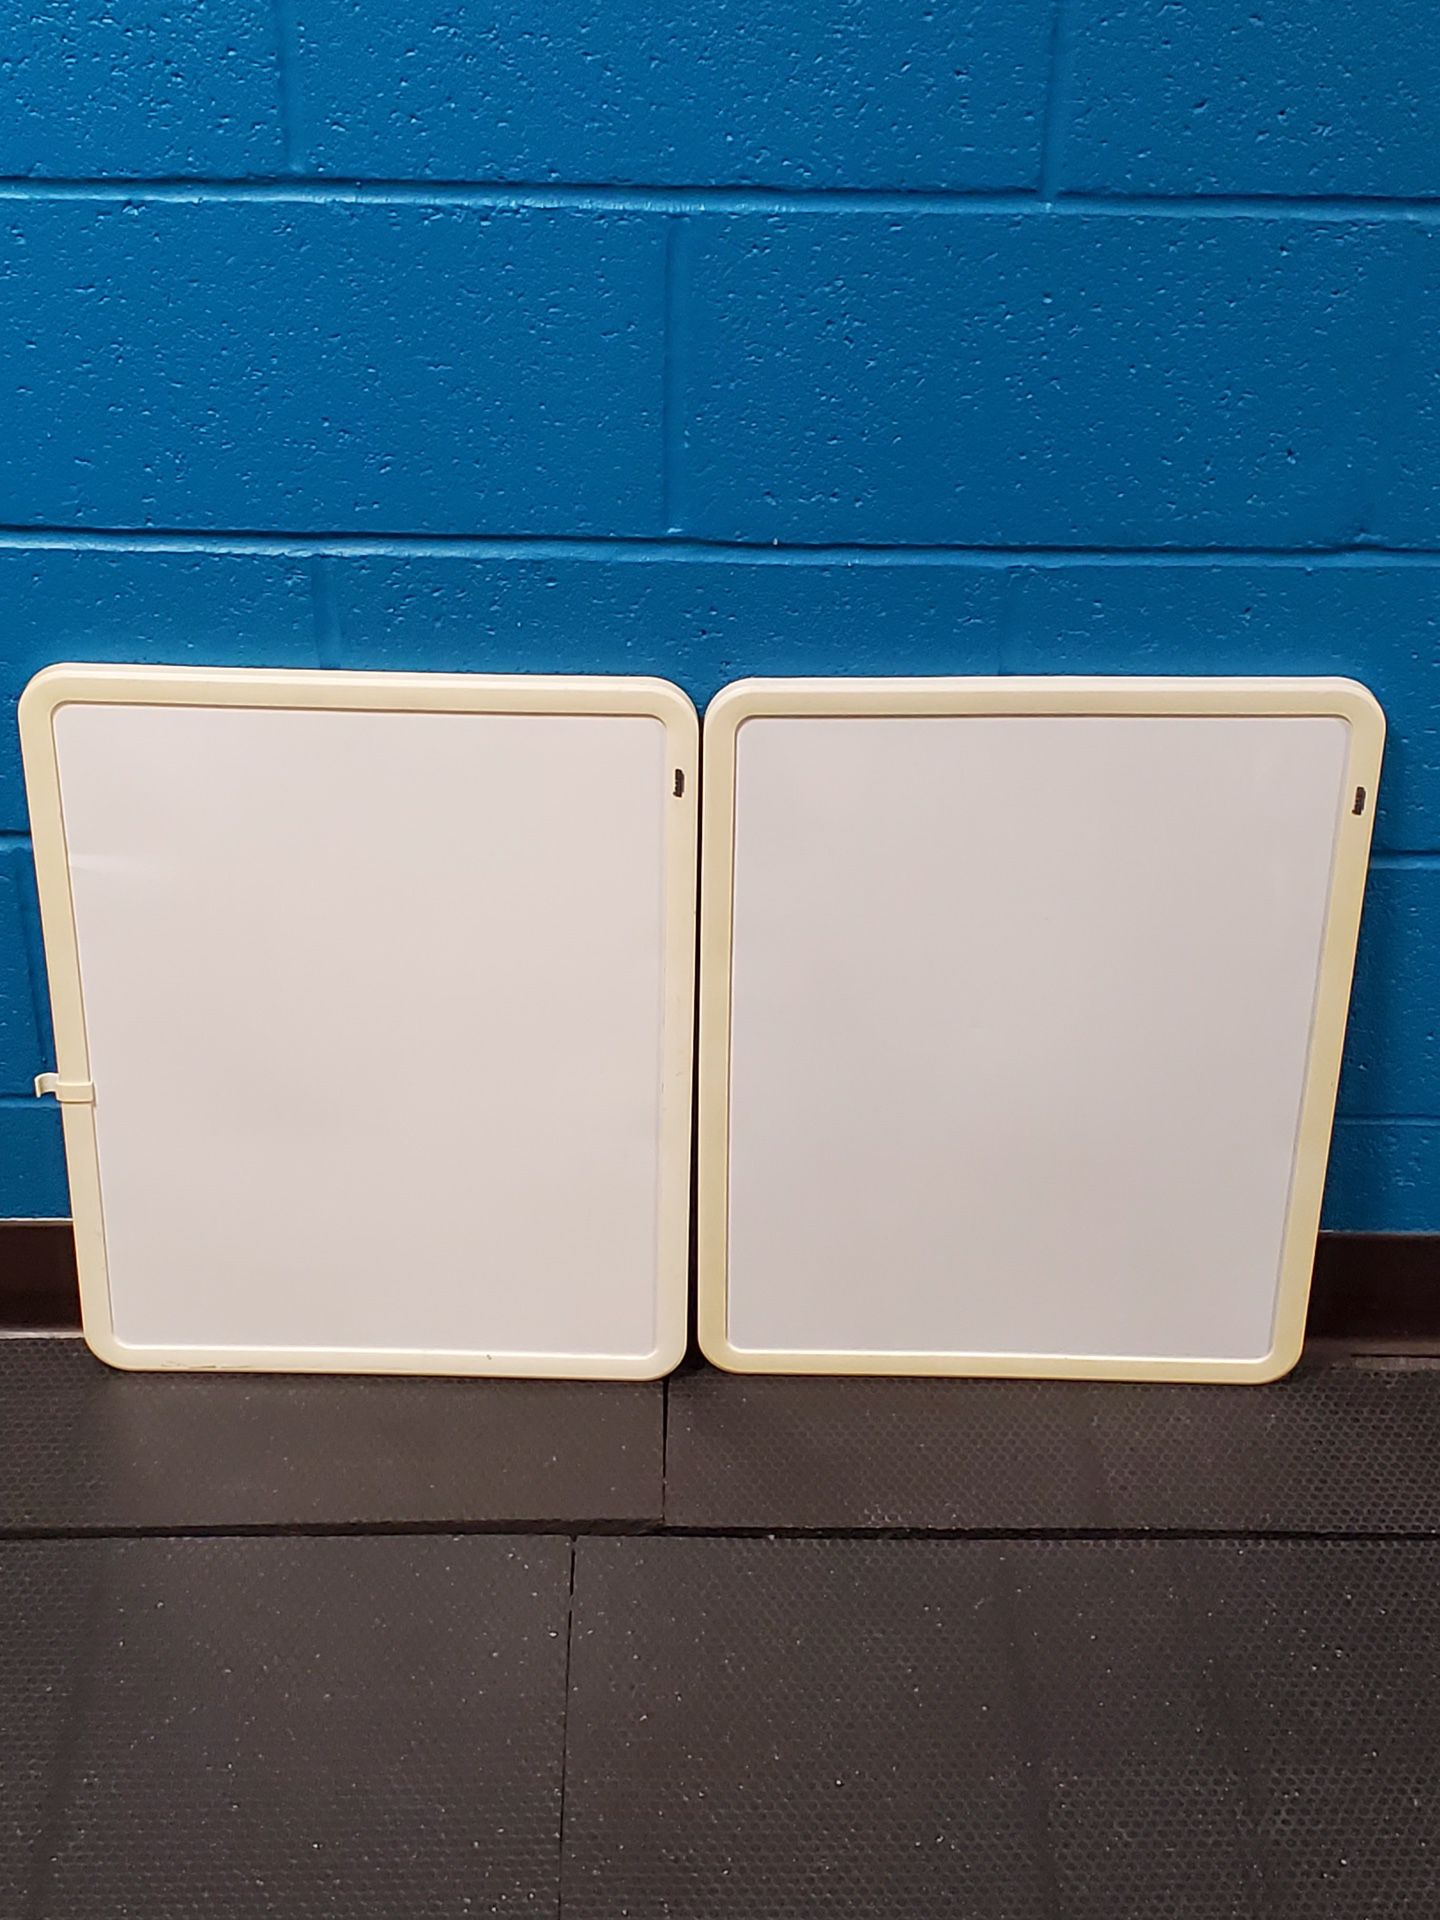 SMALL DRY/ERASE MESSAGE BOARDS (2 available) - firm price.